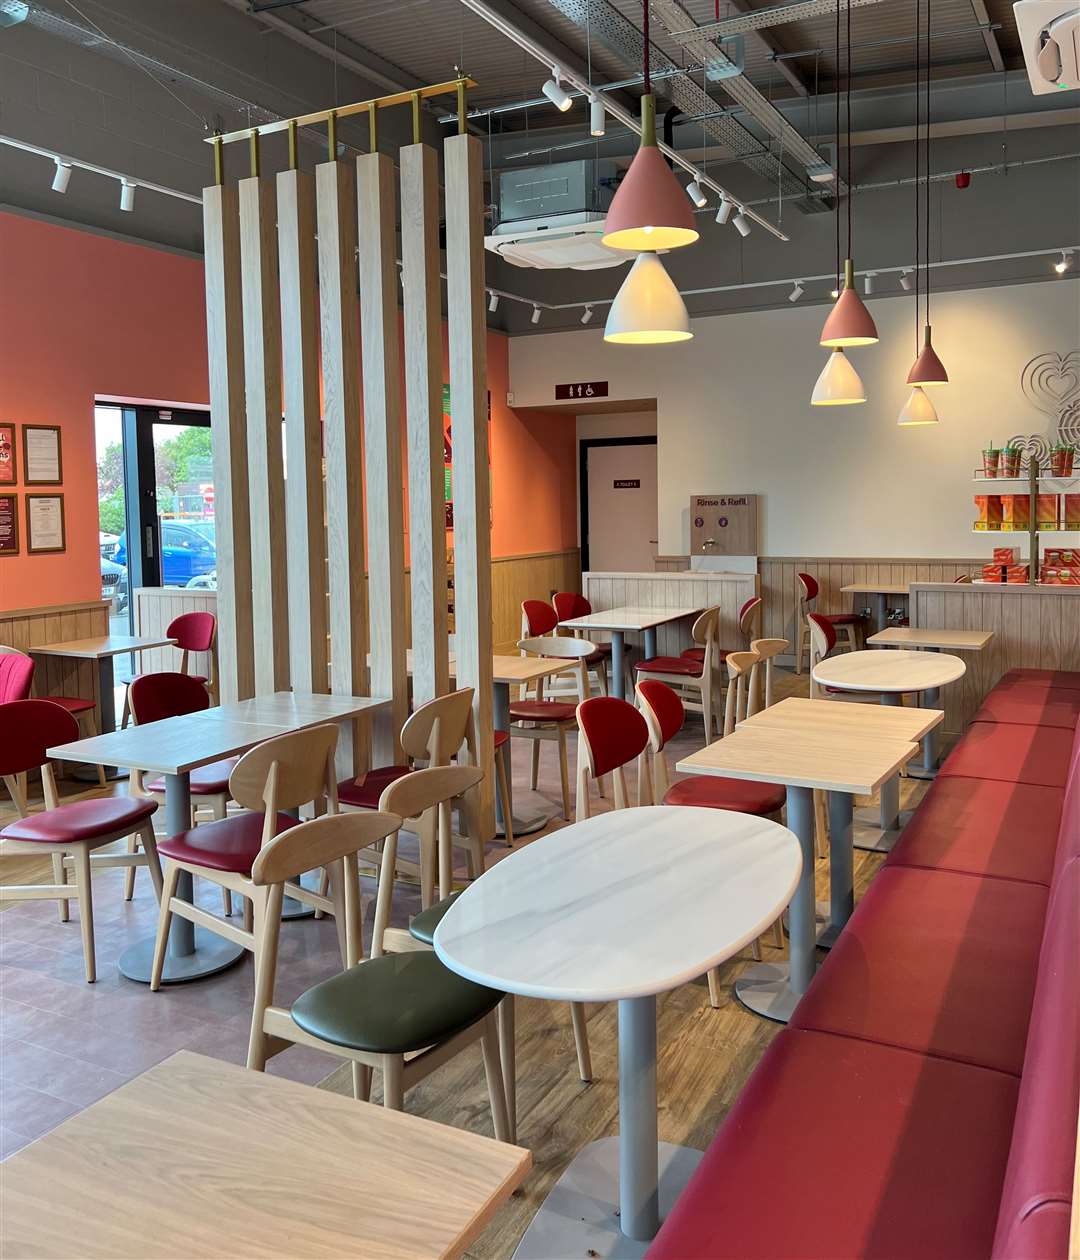 This is what the new Costa on St Nicholas Retail Park looks like inside